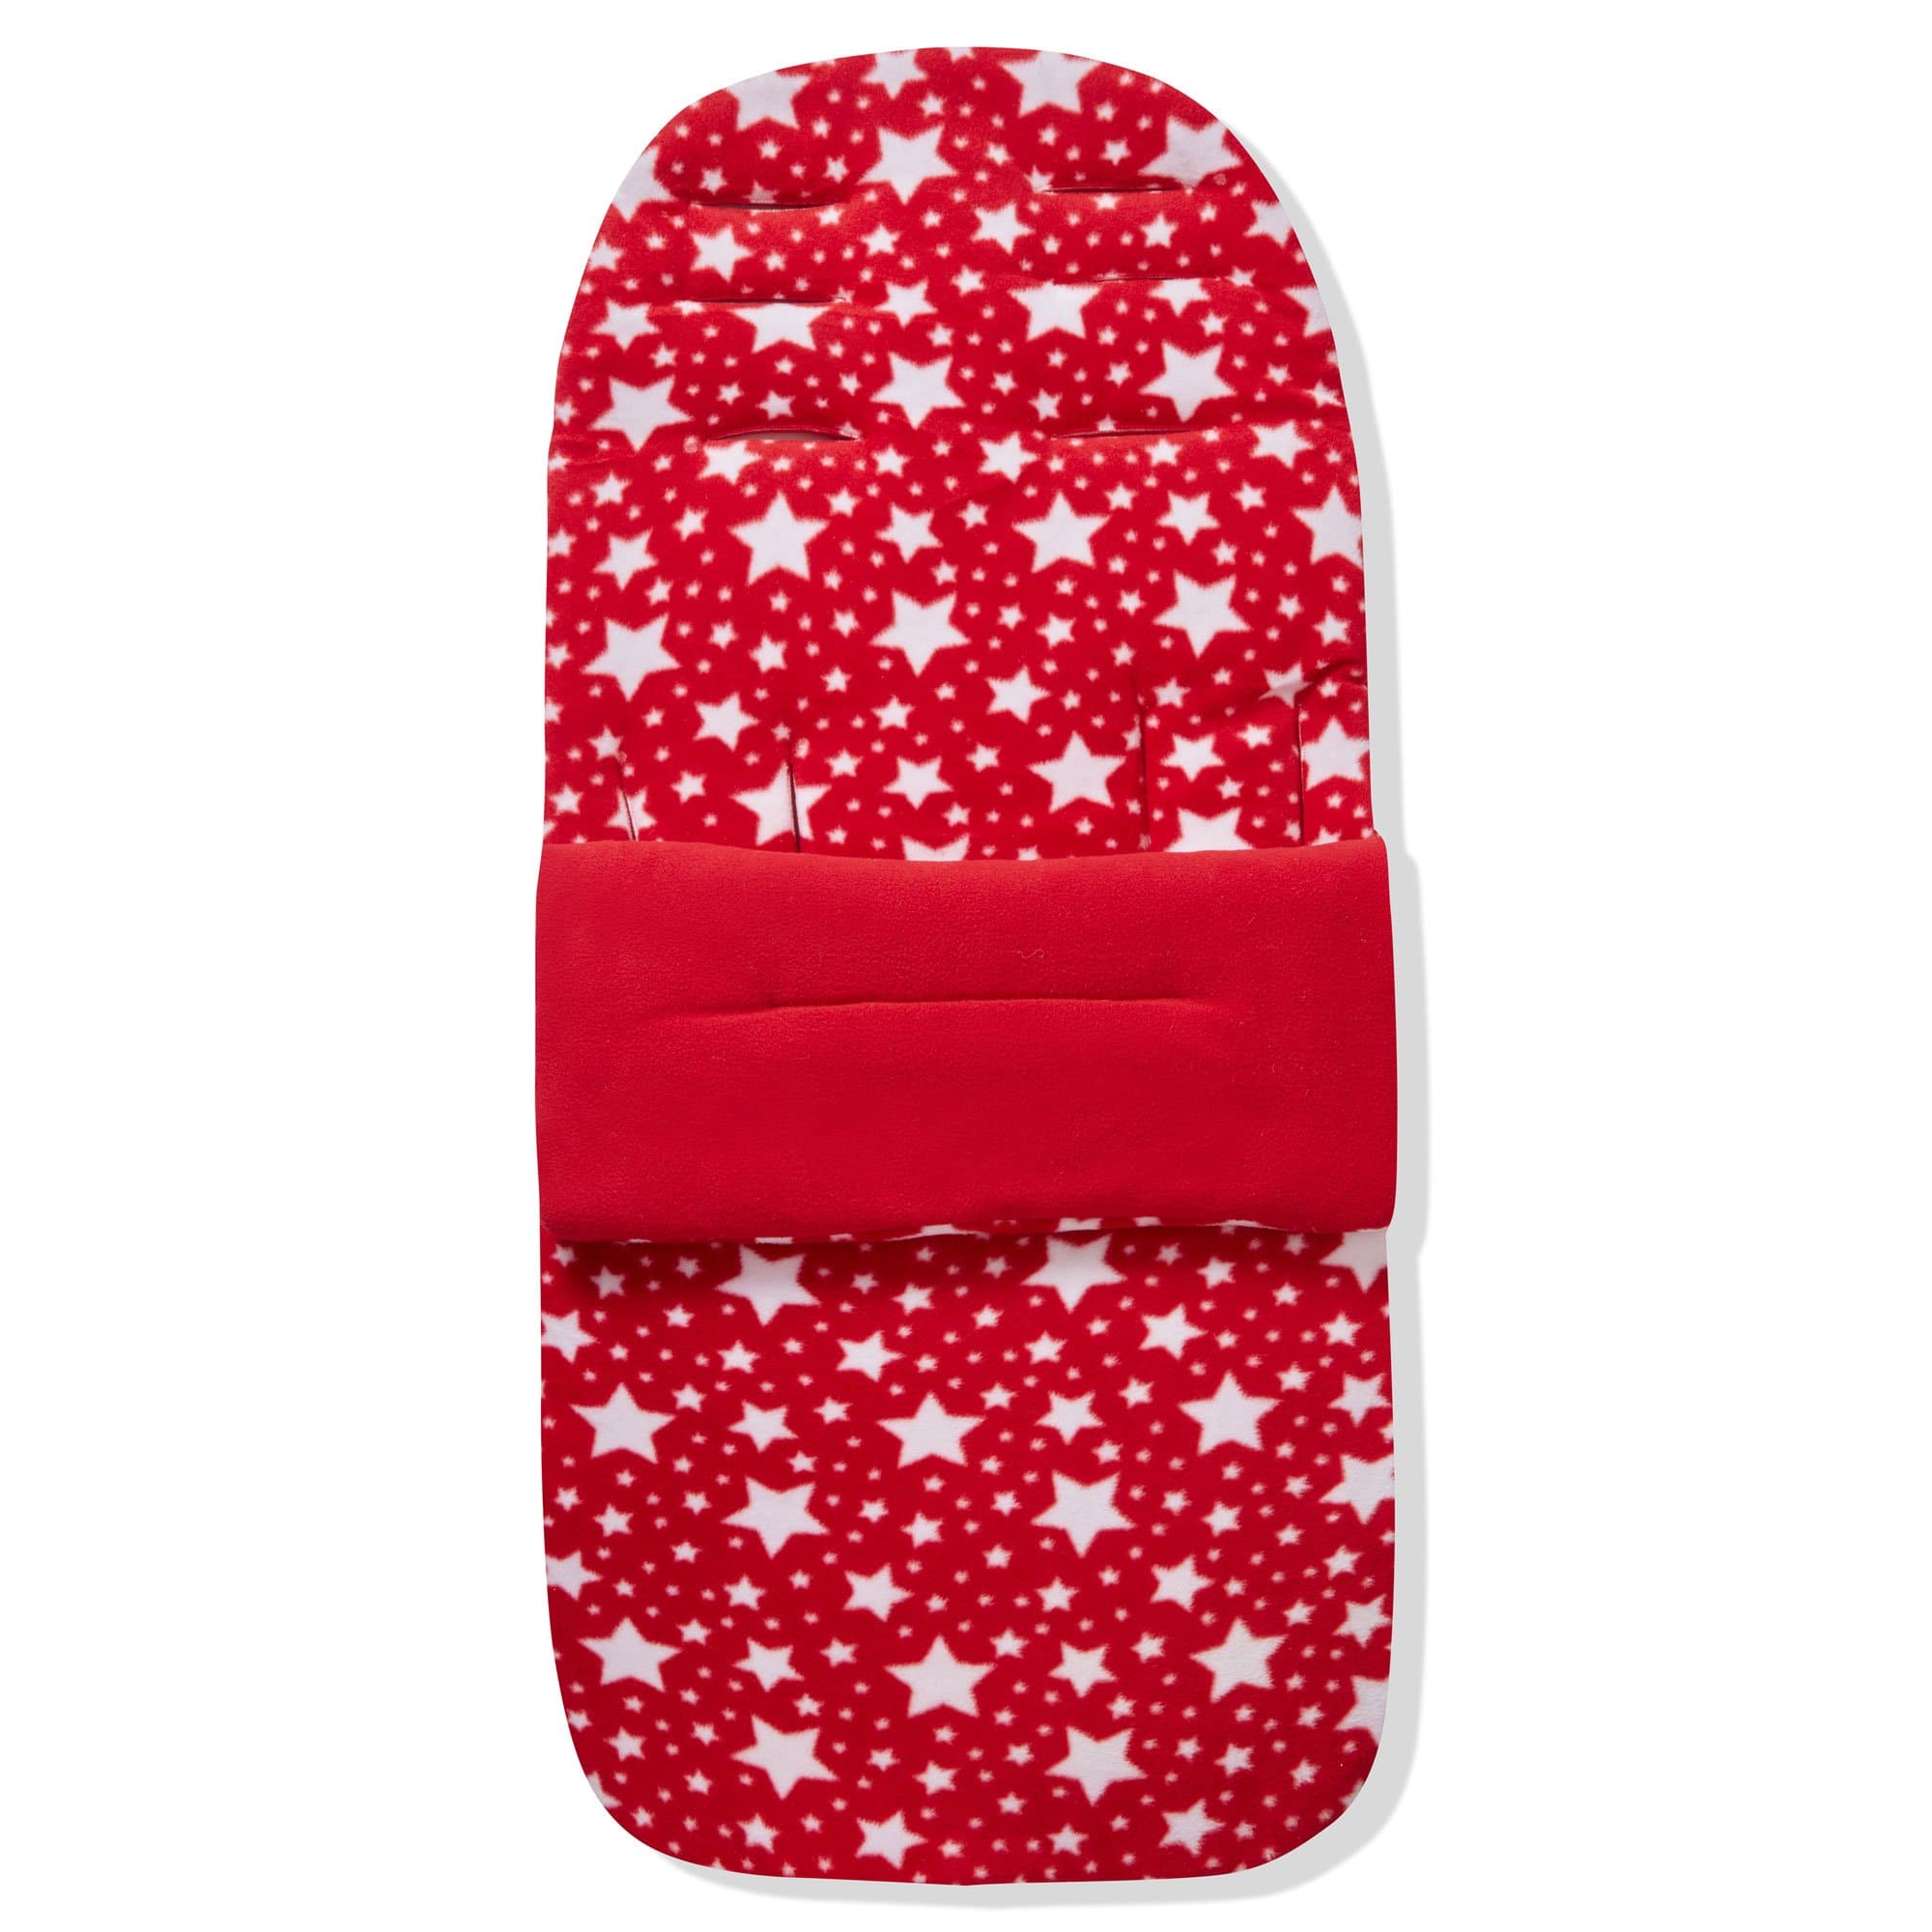 Fleece Footmuff / Cosy Toes Compatible with Hauck - Red Star / Fits All Models | For Your Little One